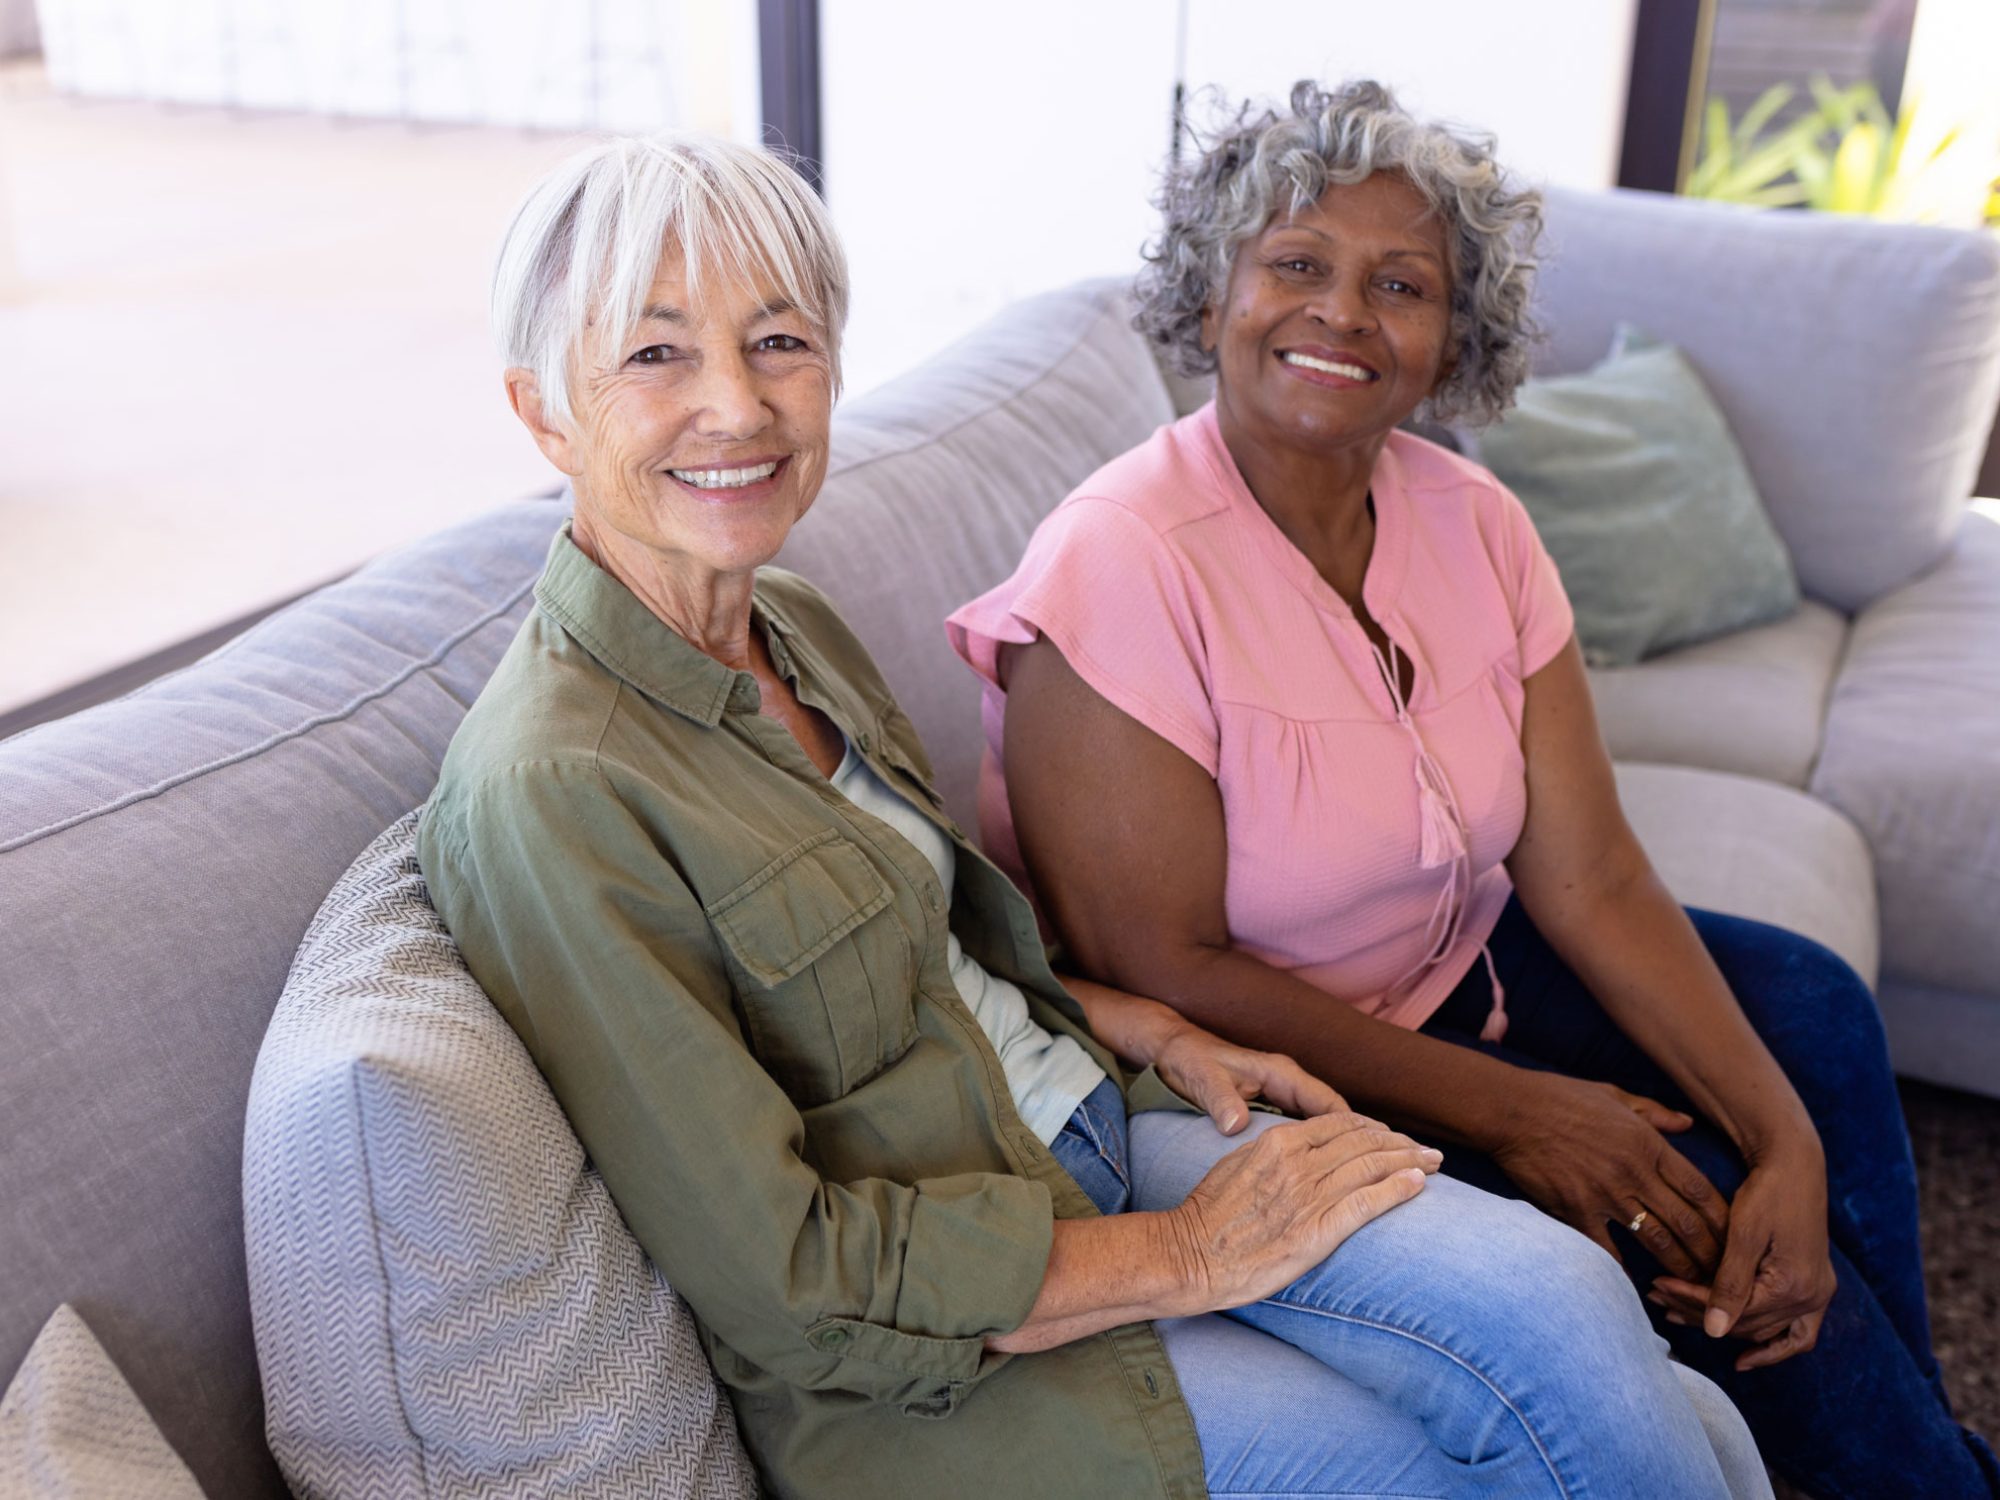 Two older women sitting together on a couch